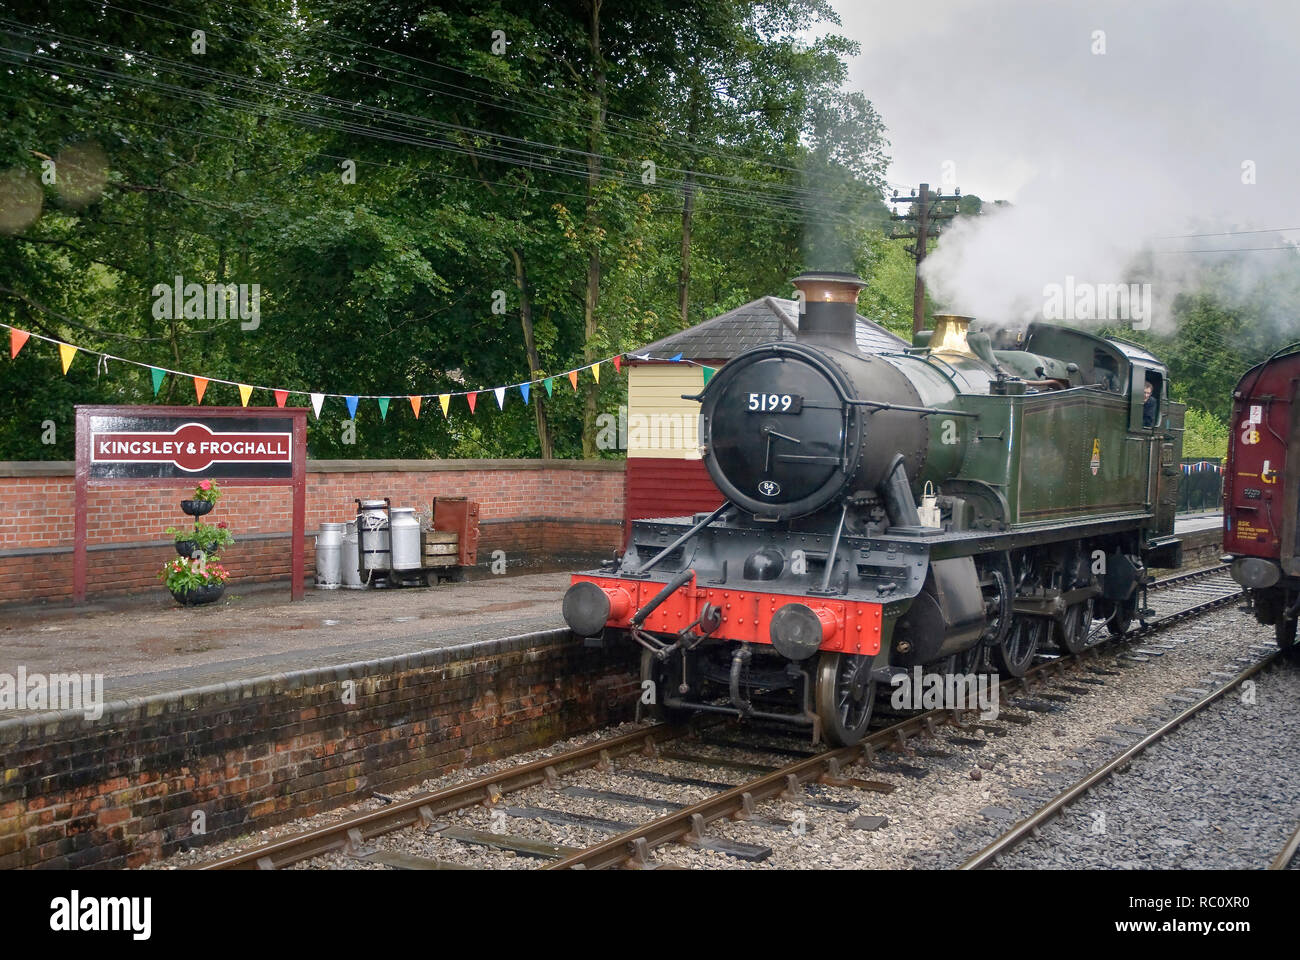 The Churnet Valley railway. Kingsley and Froghall station. GWR Prairie 5199 from the Lllangollen Railway Stock Photo